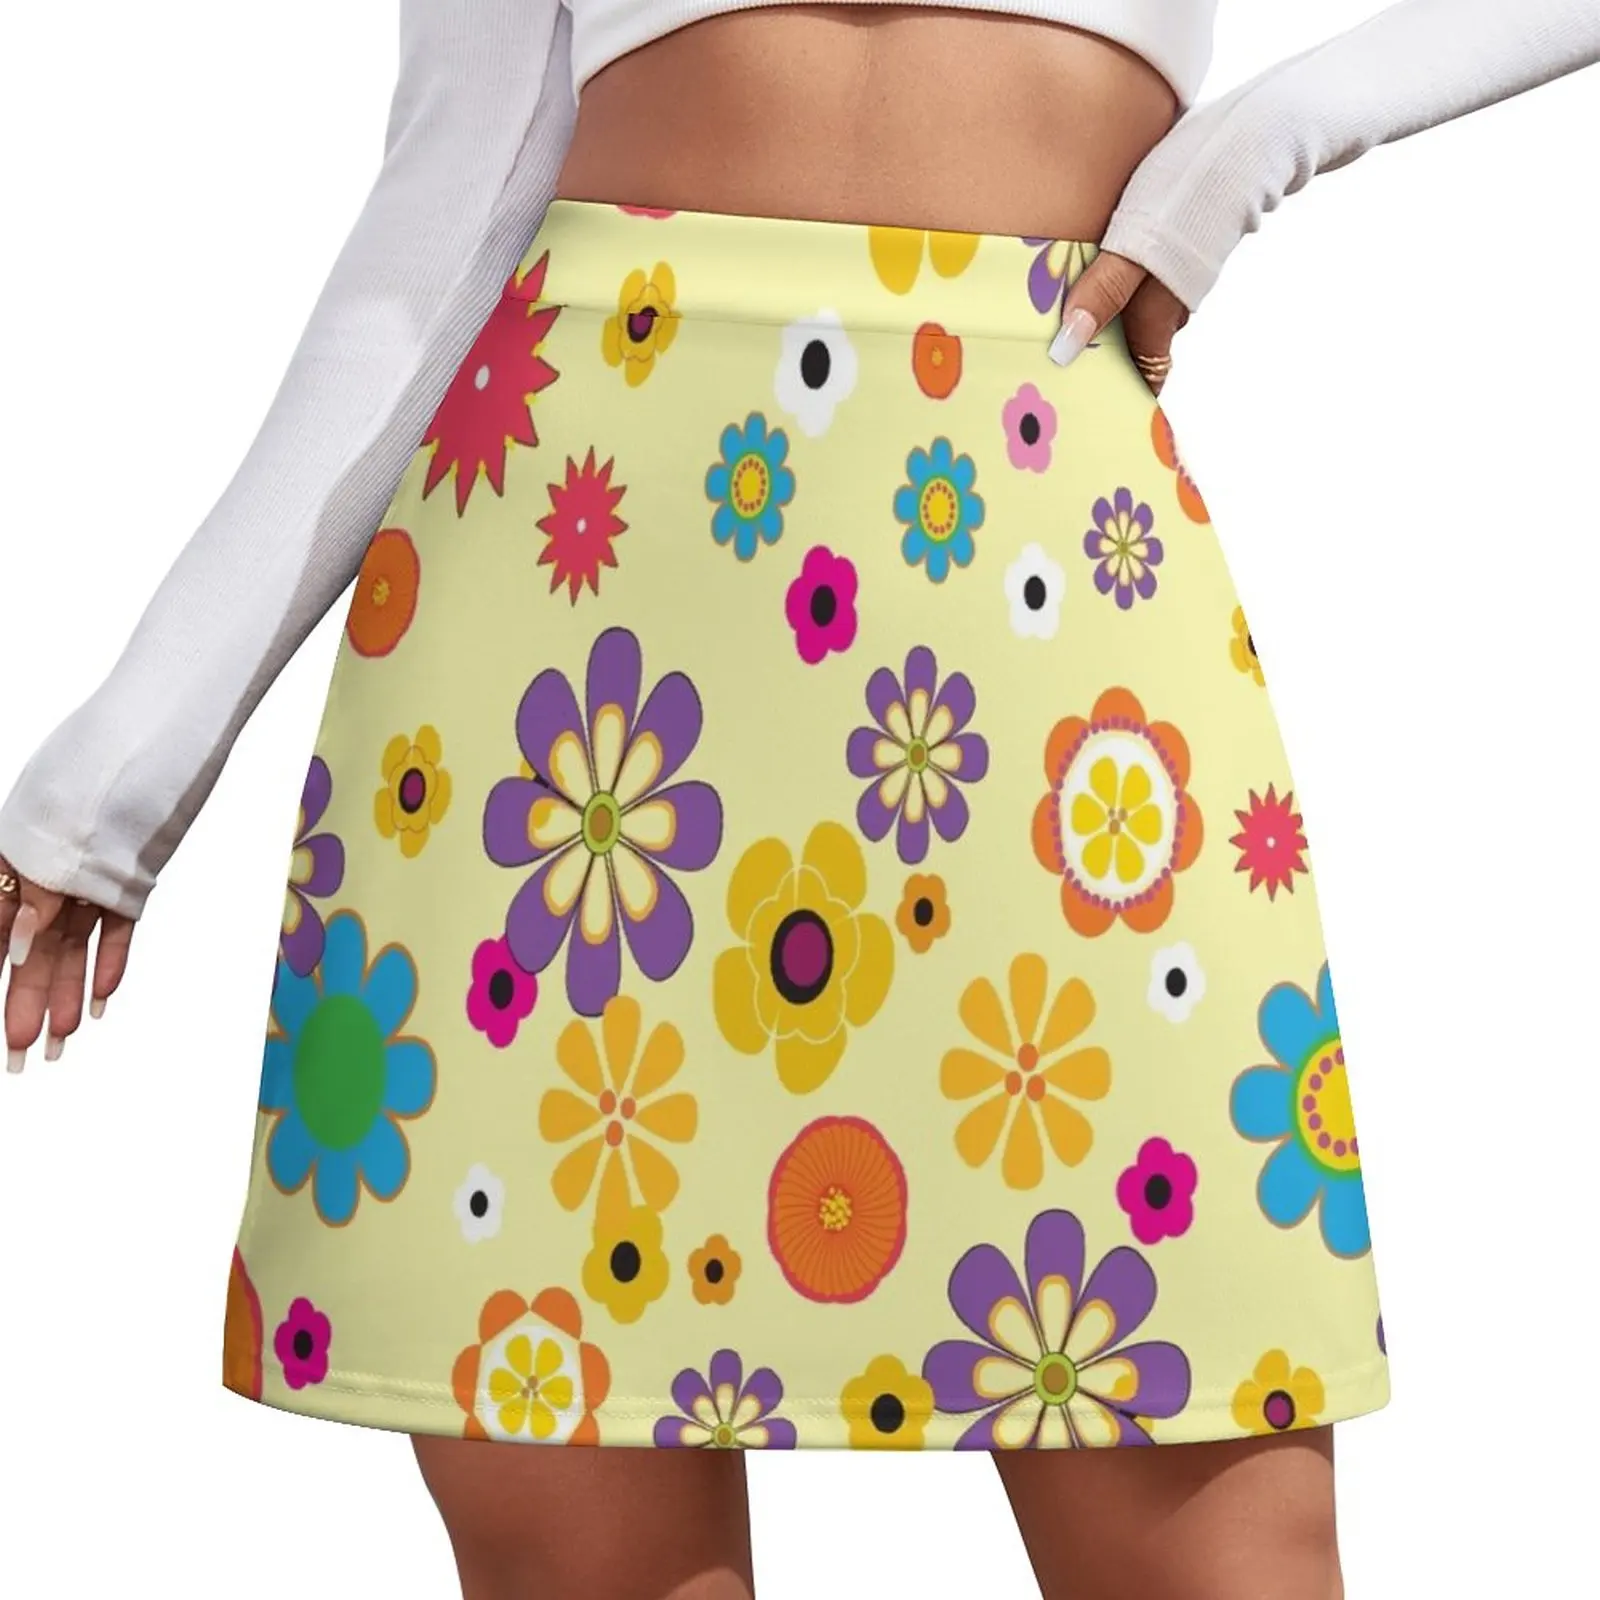 floral flowers Mini Skirt clothes for women micro mini skirt extreme